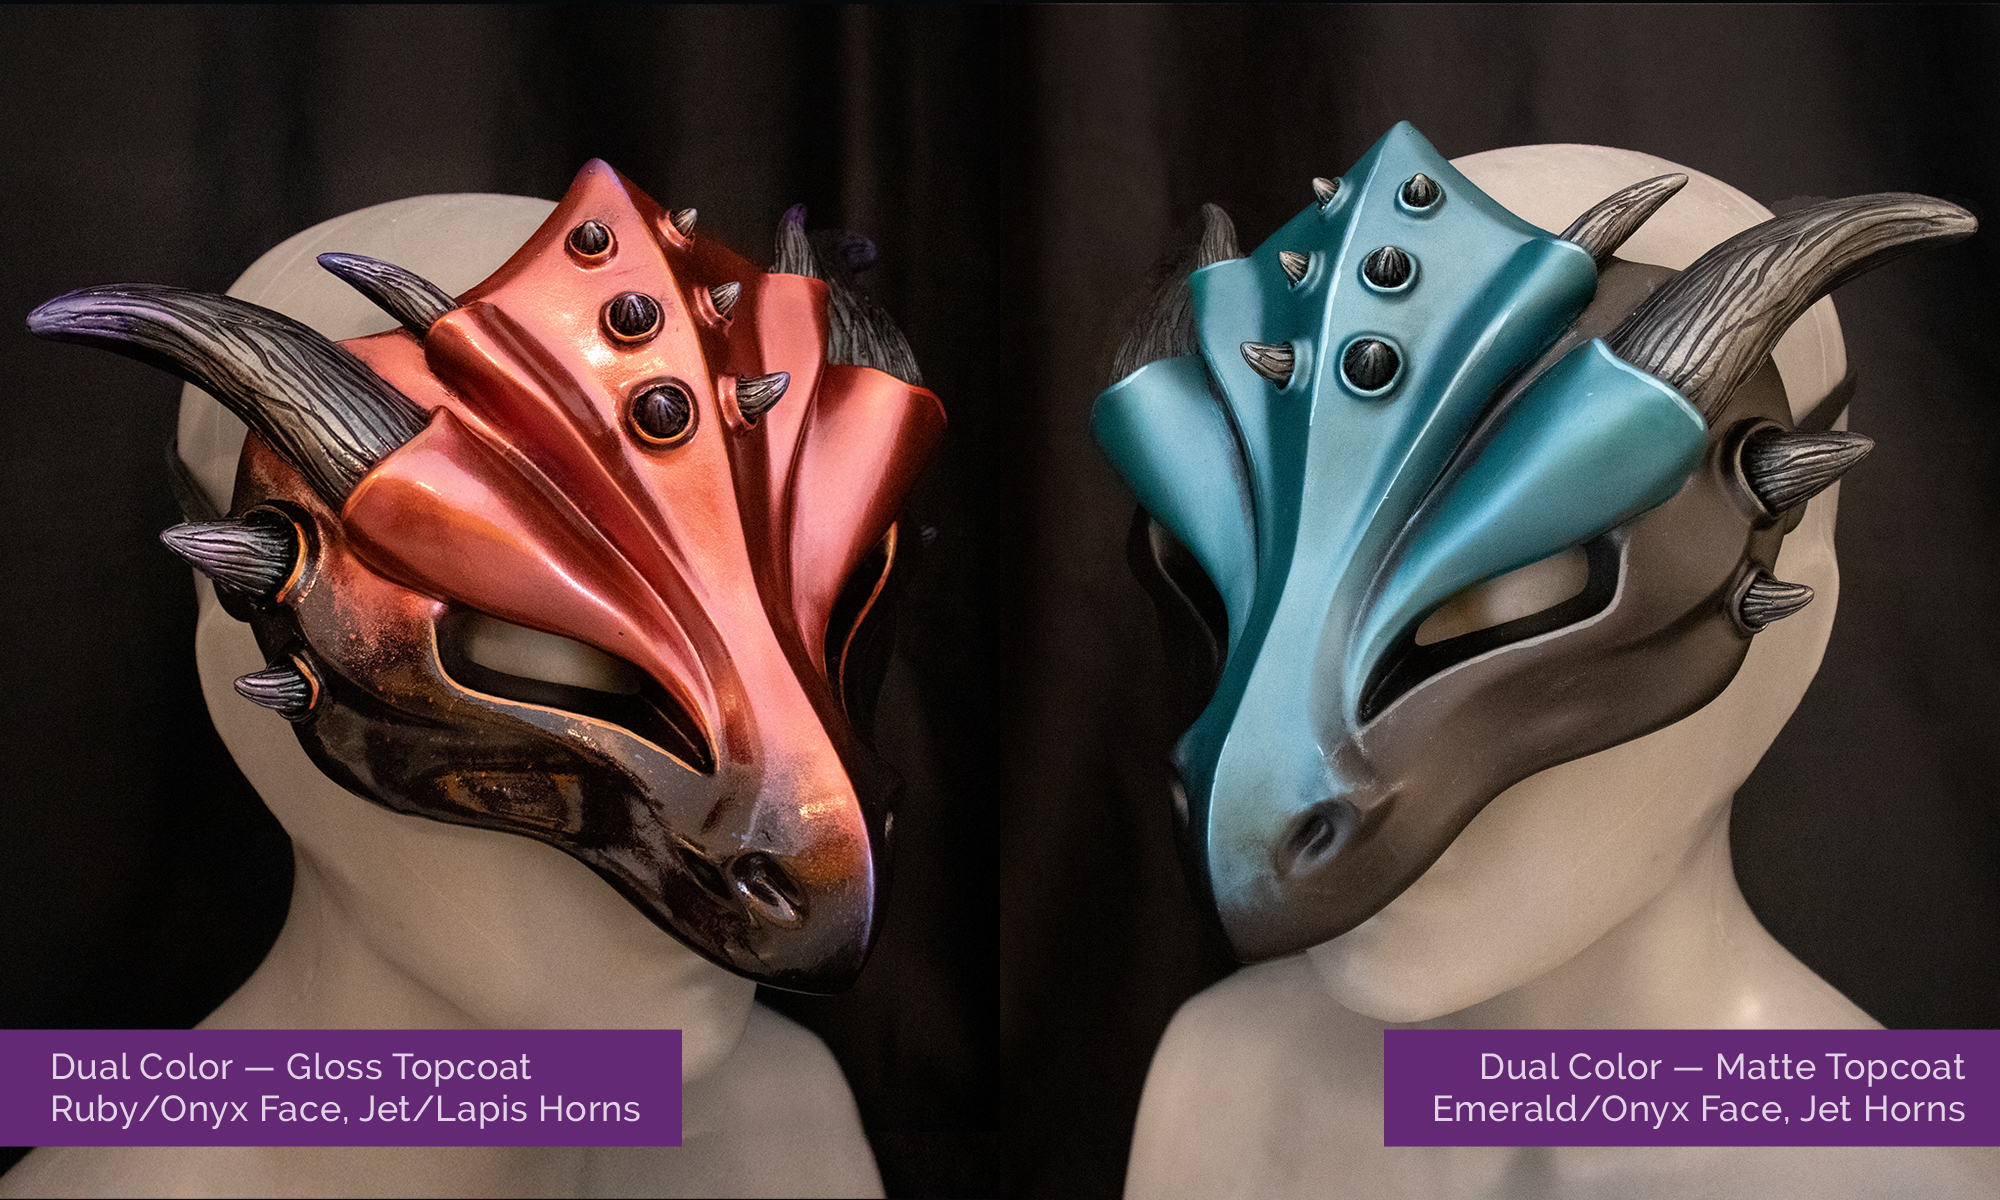 Two "dual color" custom dragon masks pictured facing into the center of the image, each tied onto a mannequin bust in front of a black background. Left caption reading: "Dual color — Gloss topcoat, Ruby/Onyx face, Jet/Lapis horns." Right caption reads: "Dual color — Matte topcoat, Emerald/Onyx face, Jet horns."